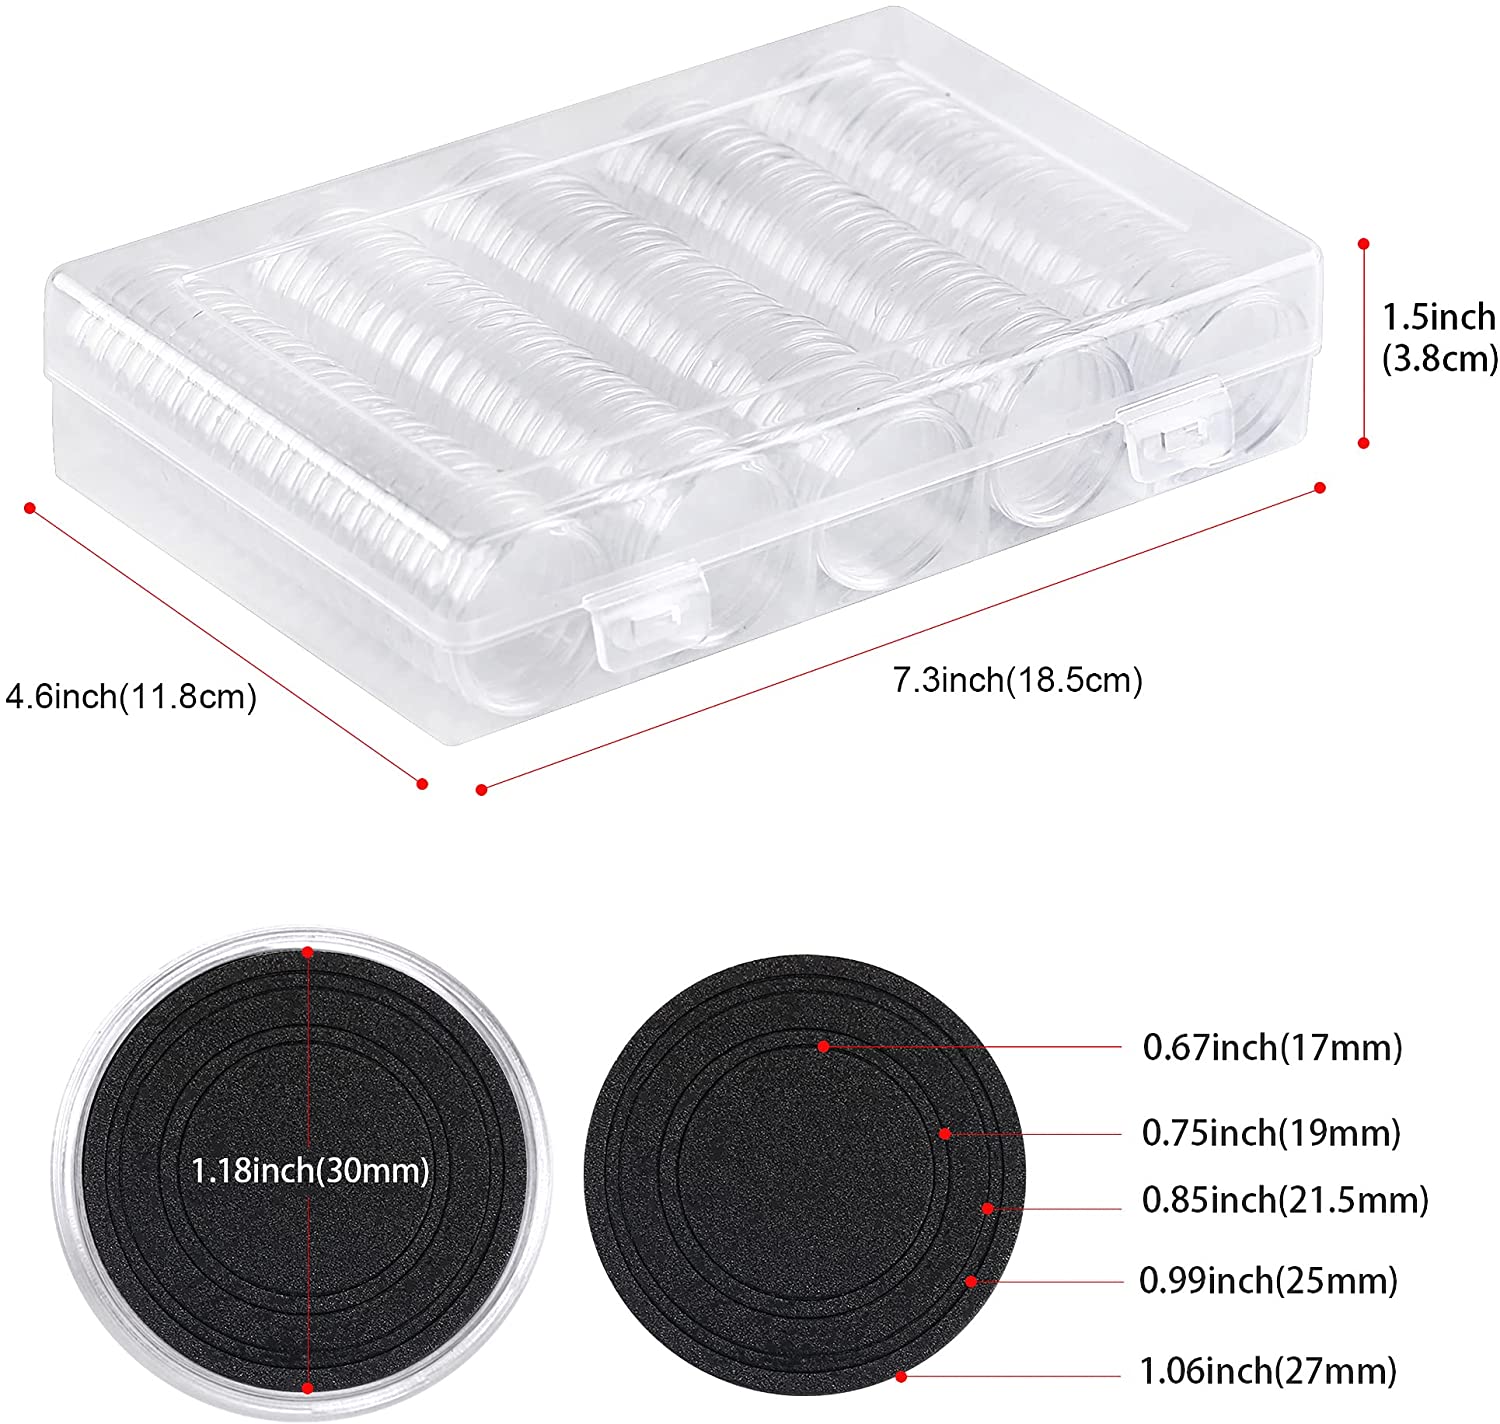 Wlnner 100Pcs 30mm Coin Capsules with Plastic Storage Organizer Box and Protect Gasket Coin Holder Case for Coin Collection Supplies 5Size：17/20/25/27/30 mm 